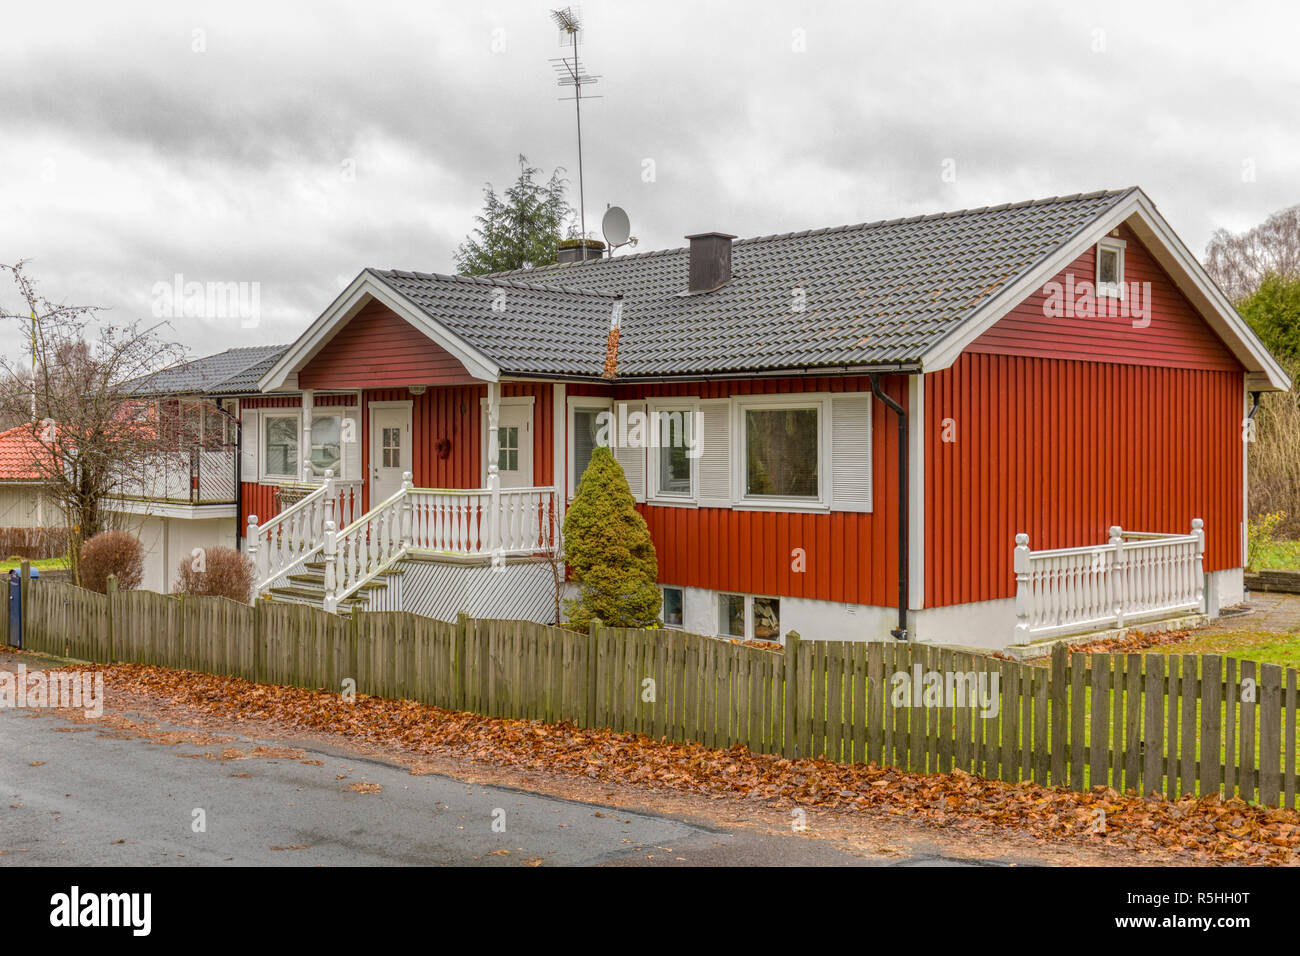 FLODA, SWEDEN - NOVEMBER 21 2018: Typical Swedish red painted wood detached house Stock Photo